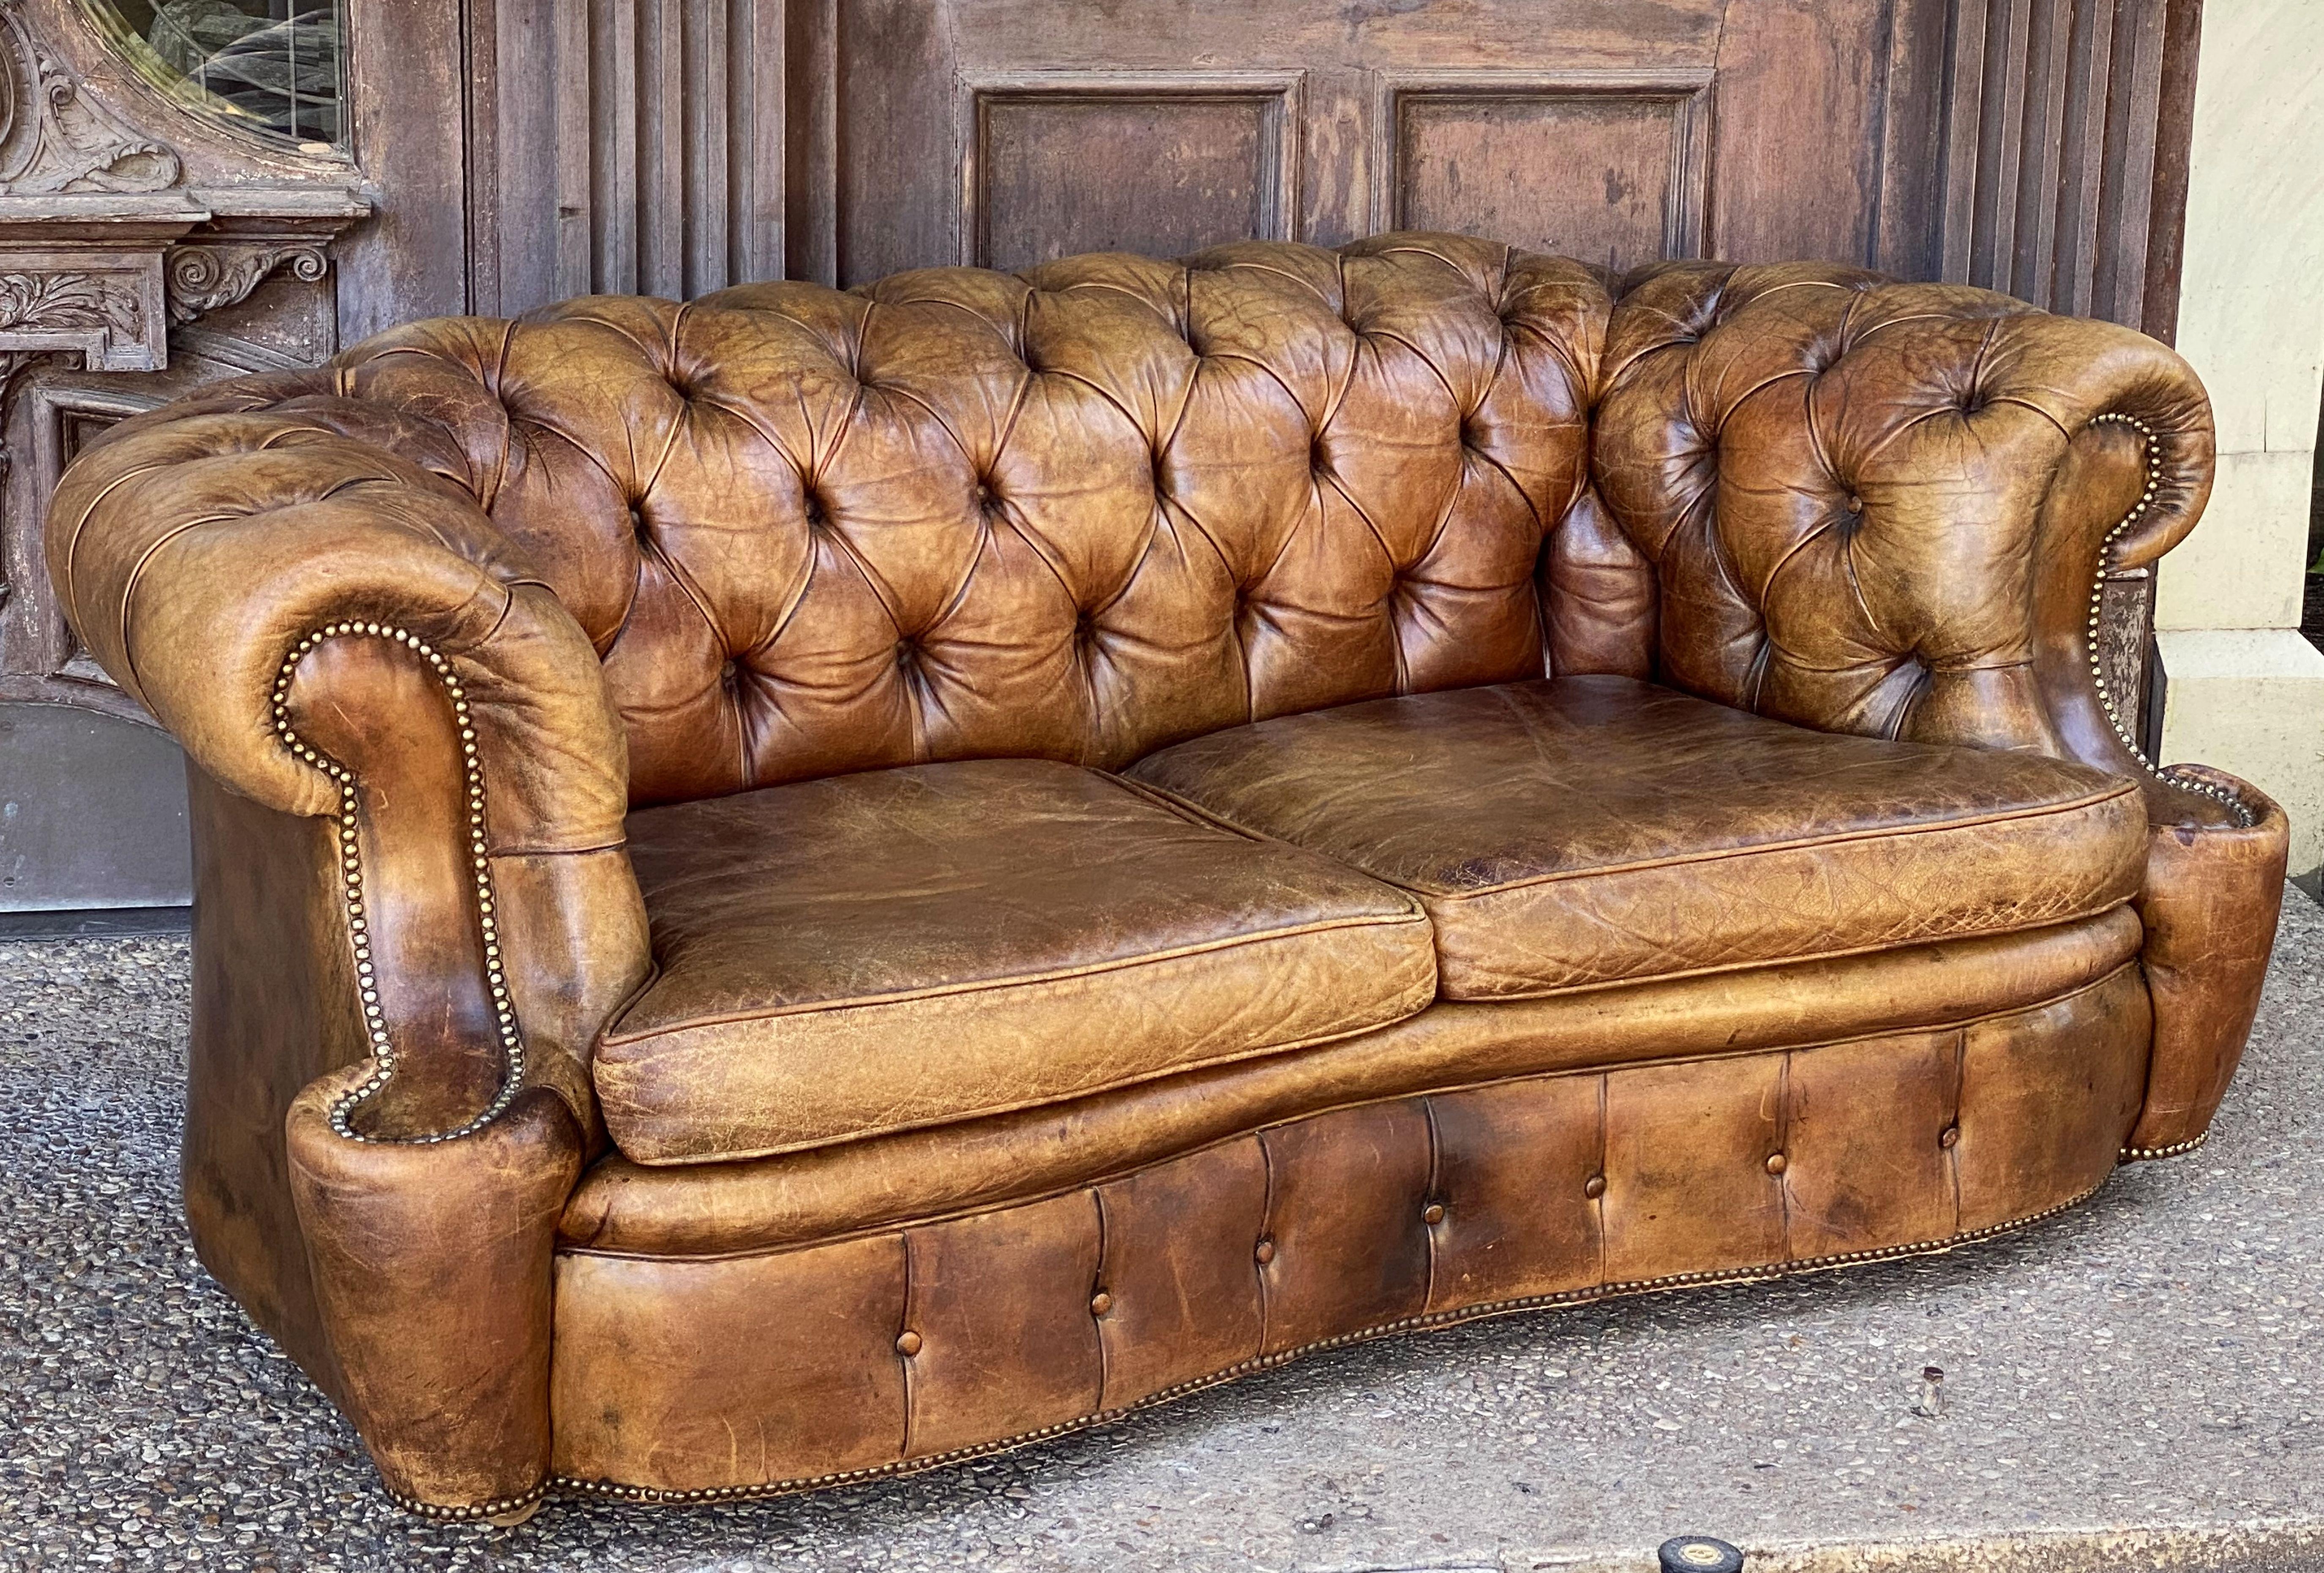 A fine, comfortable English Chesterfield sofa in vintage leather featuring a serpentine profile with button-tufted back and arms, two soft leather fitted seat cushions, and beaded-nail trim design, resting on removable metal casters.

The